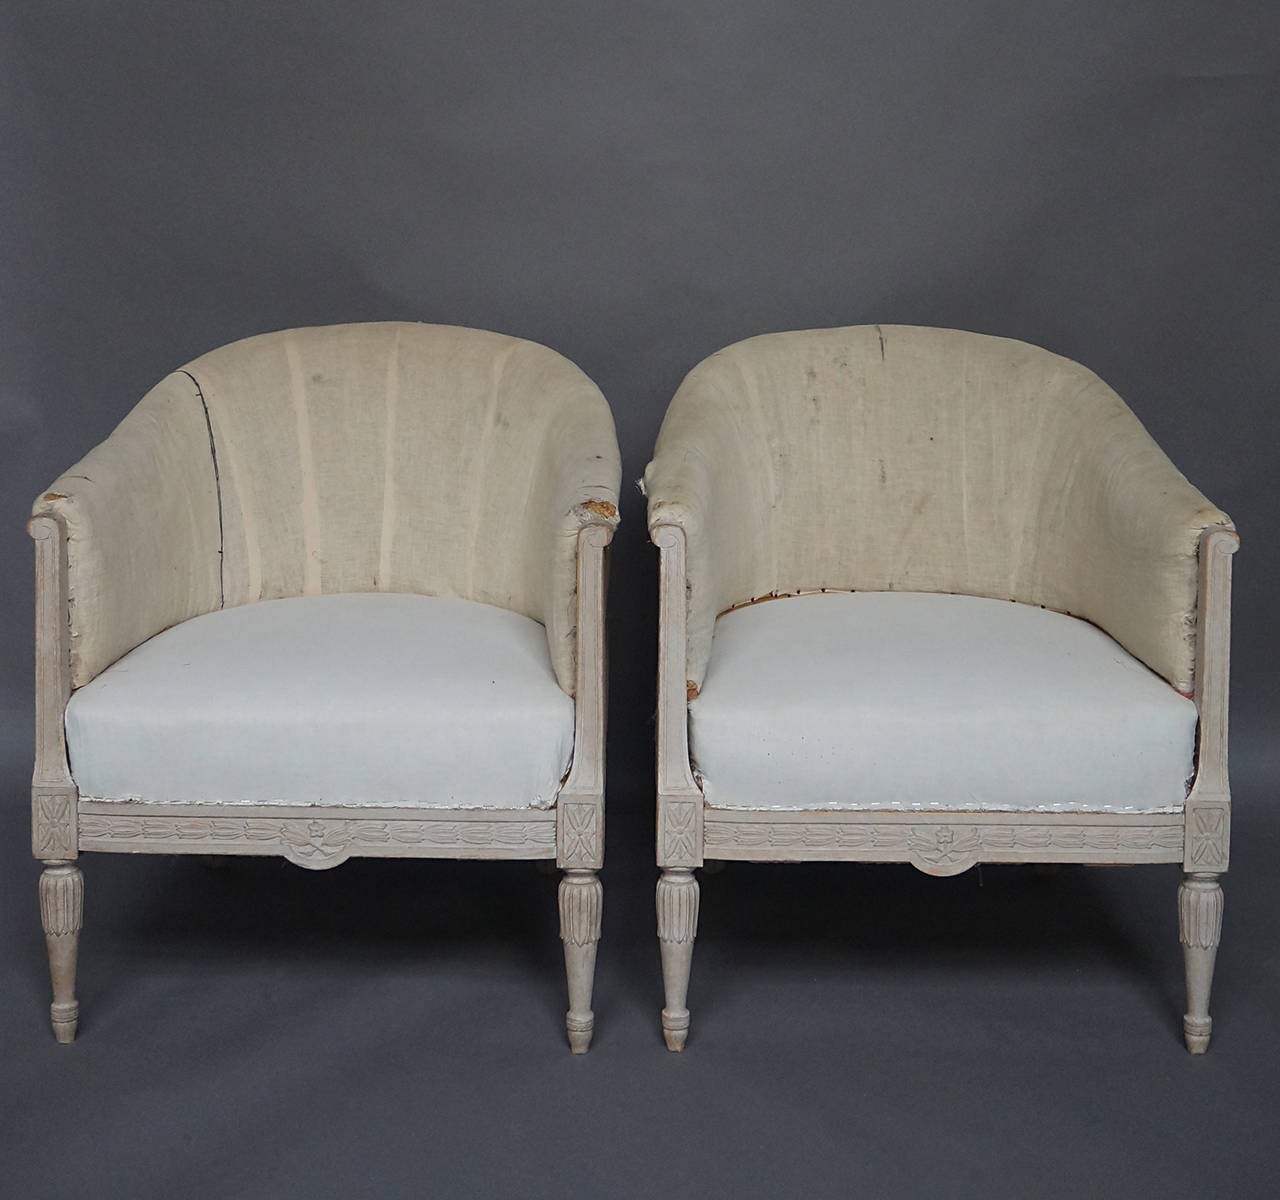 Pair of club chairs, Sweden, circa 1910, in the Gustavian Style. Carved frame with bell-flowers, rosettes, and lotus details. Upholstered seats and backs.